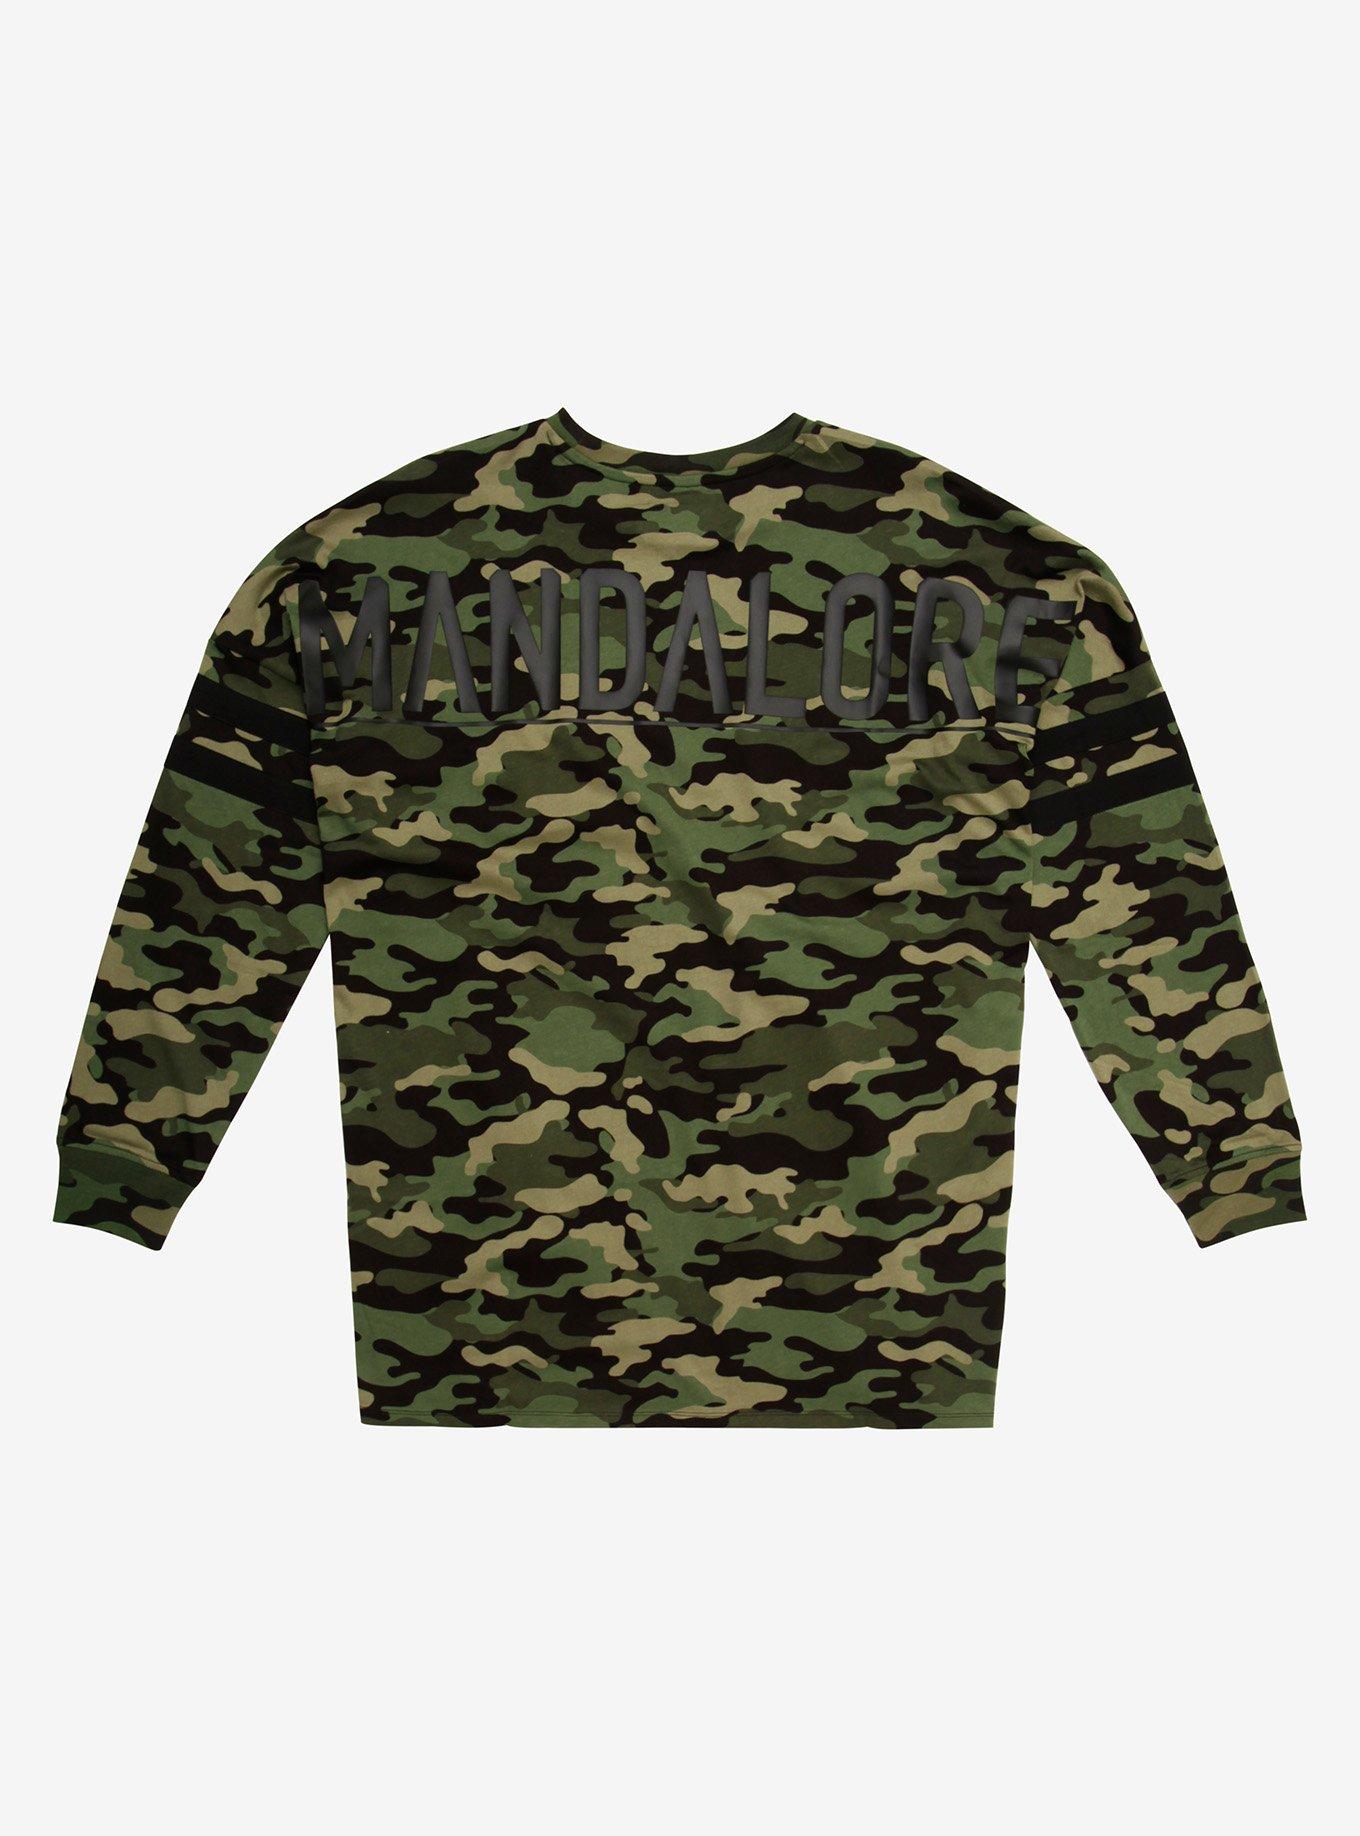 Our Universe Star Wars Mandalore Camouflage Hype Jersey - BoxLunch Exclusive, CAMO, hi-res